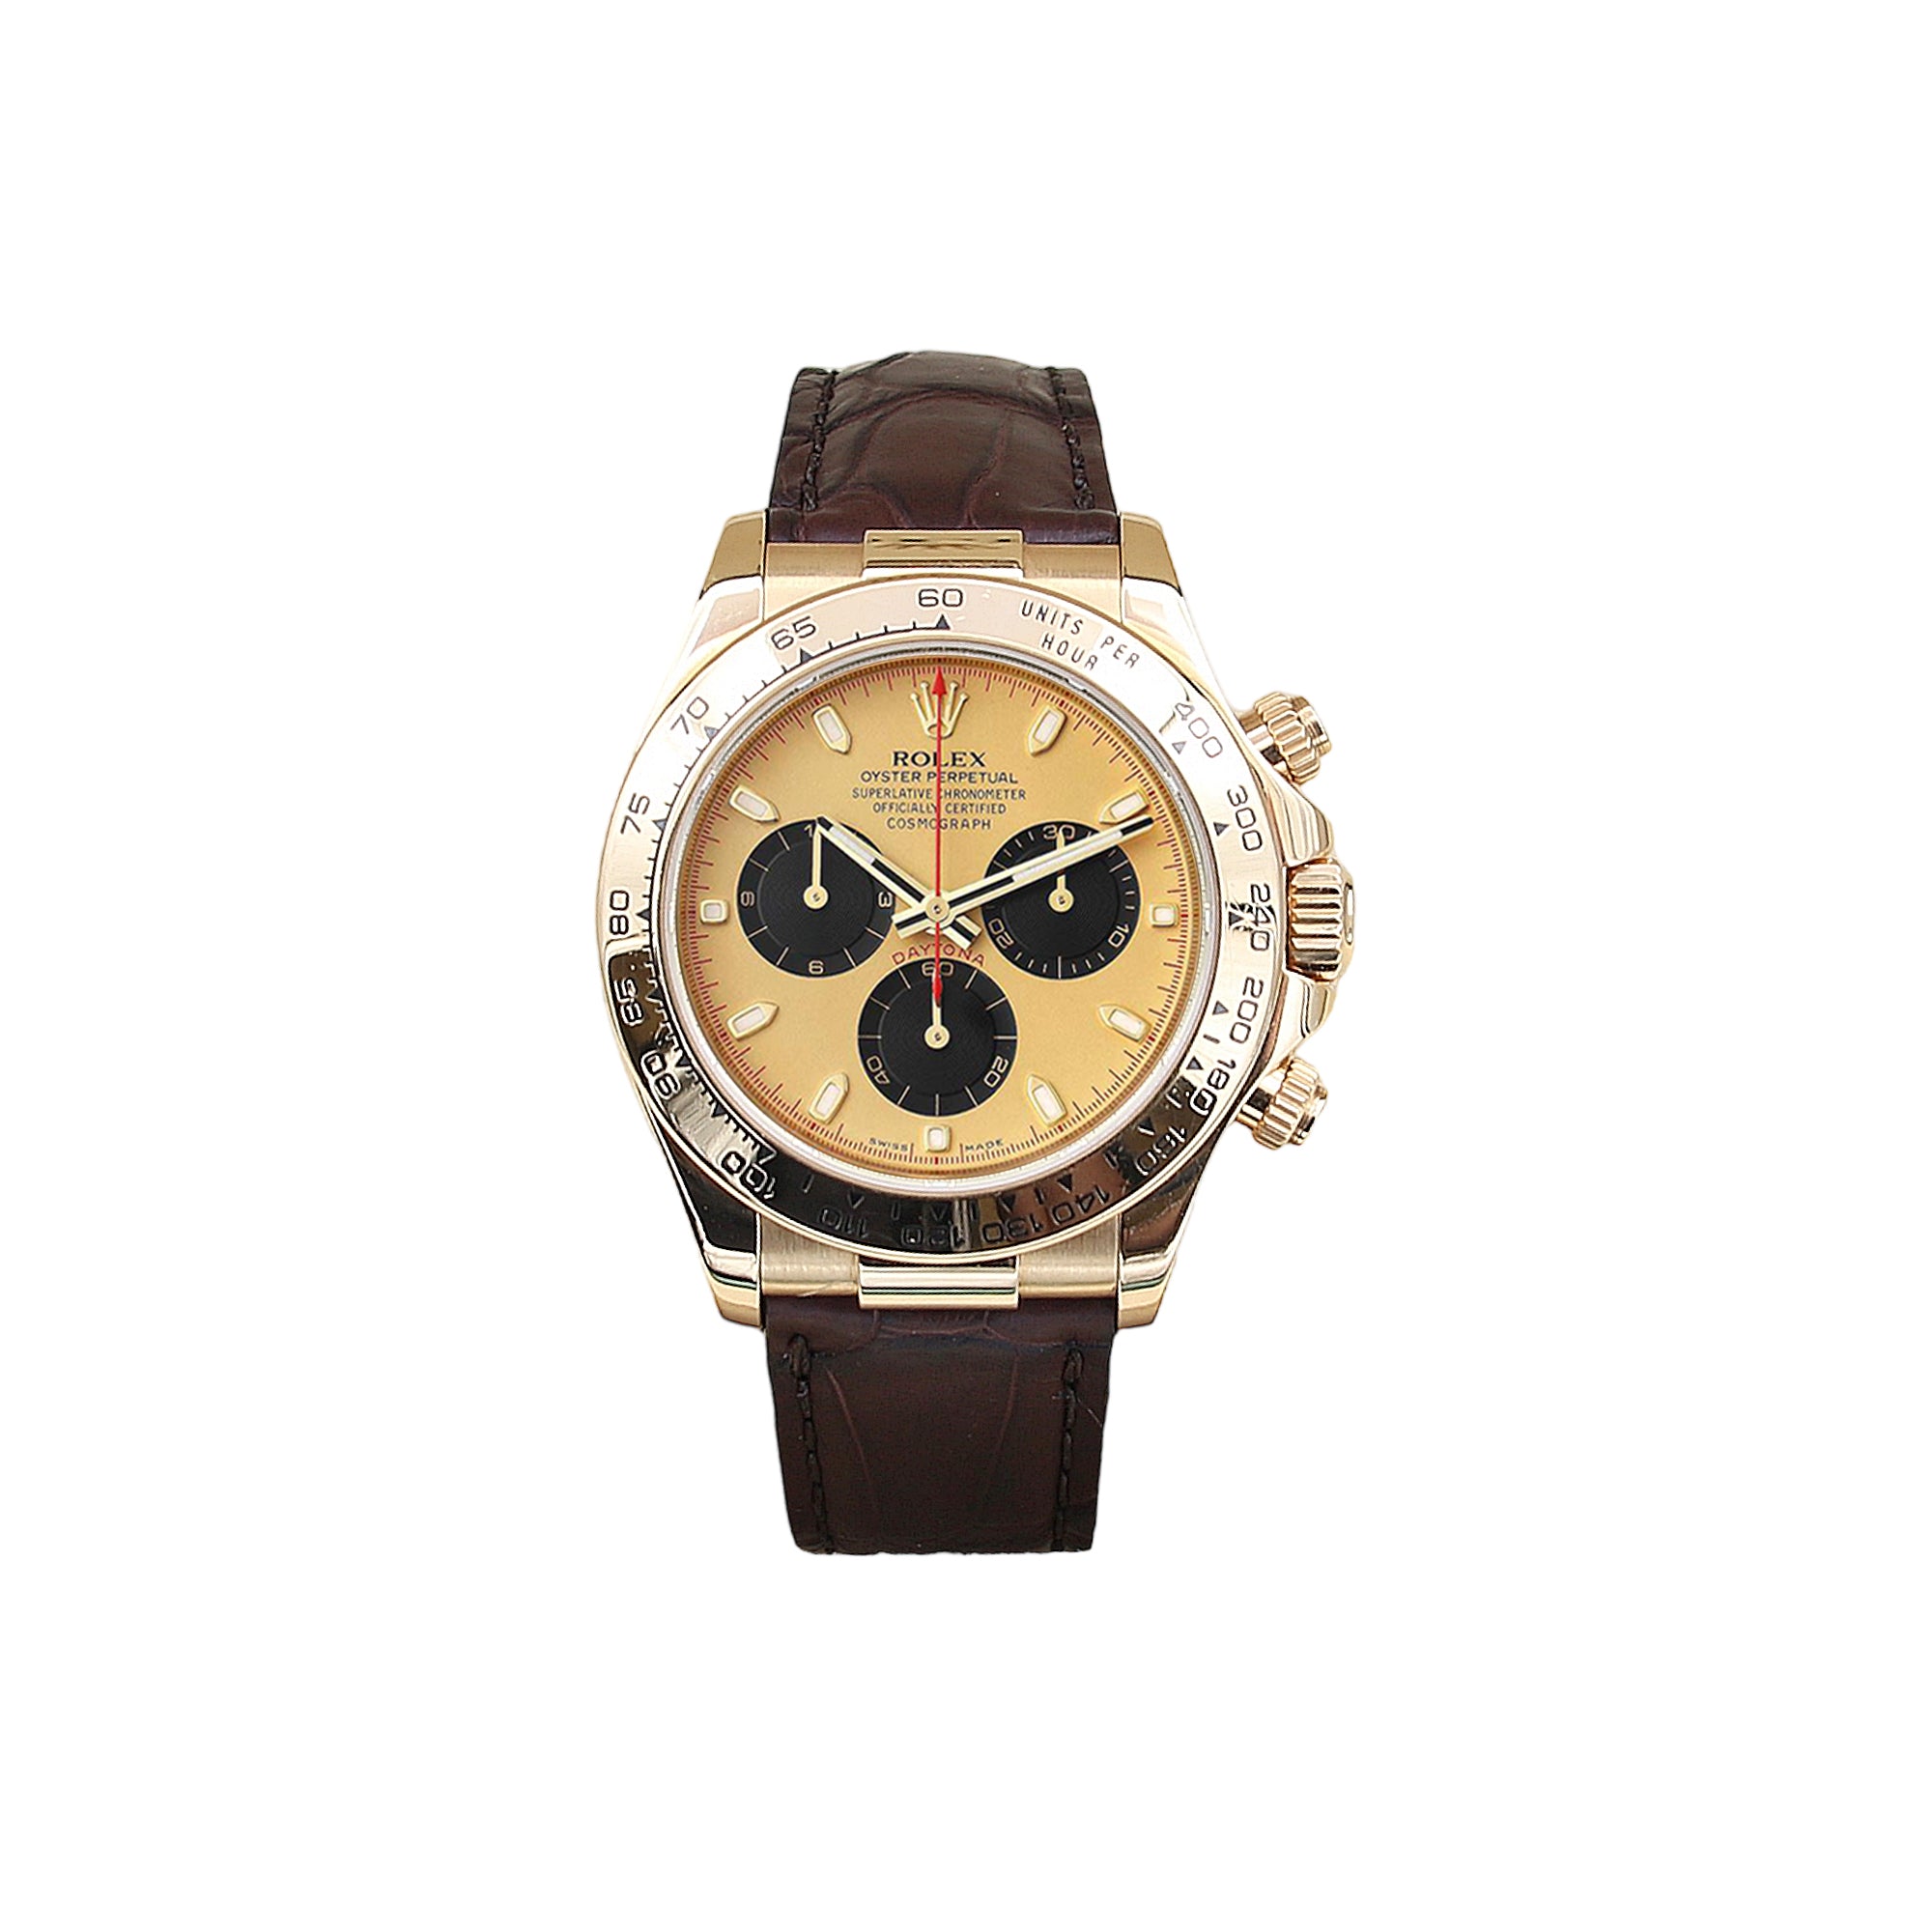 Rolex Daytona ref. 116518 - 18k Yellow Gold and Leather Strap - Champagne dial with black subdials- Full Set